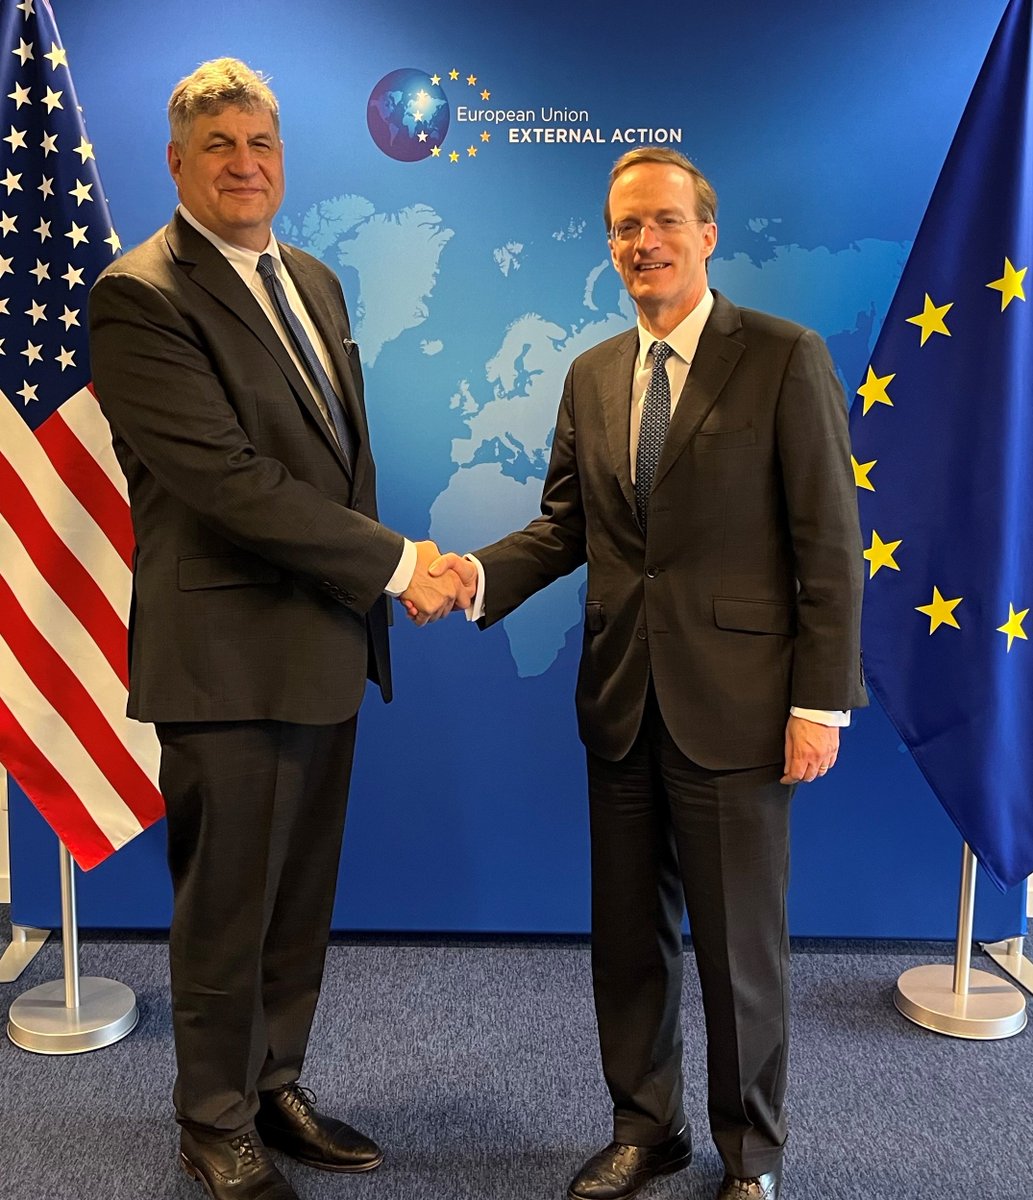 Pleased to see again #USDoD LaPlante and discuss mutual efforts on defence procurement and ramp-up industrial production. This is what 🇪🇺 & 🇺🇸 have to continue doing to support Ukraine and our armed forces.

#EUdefence